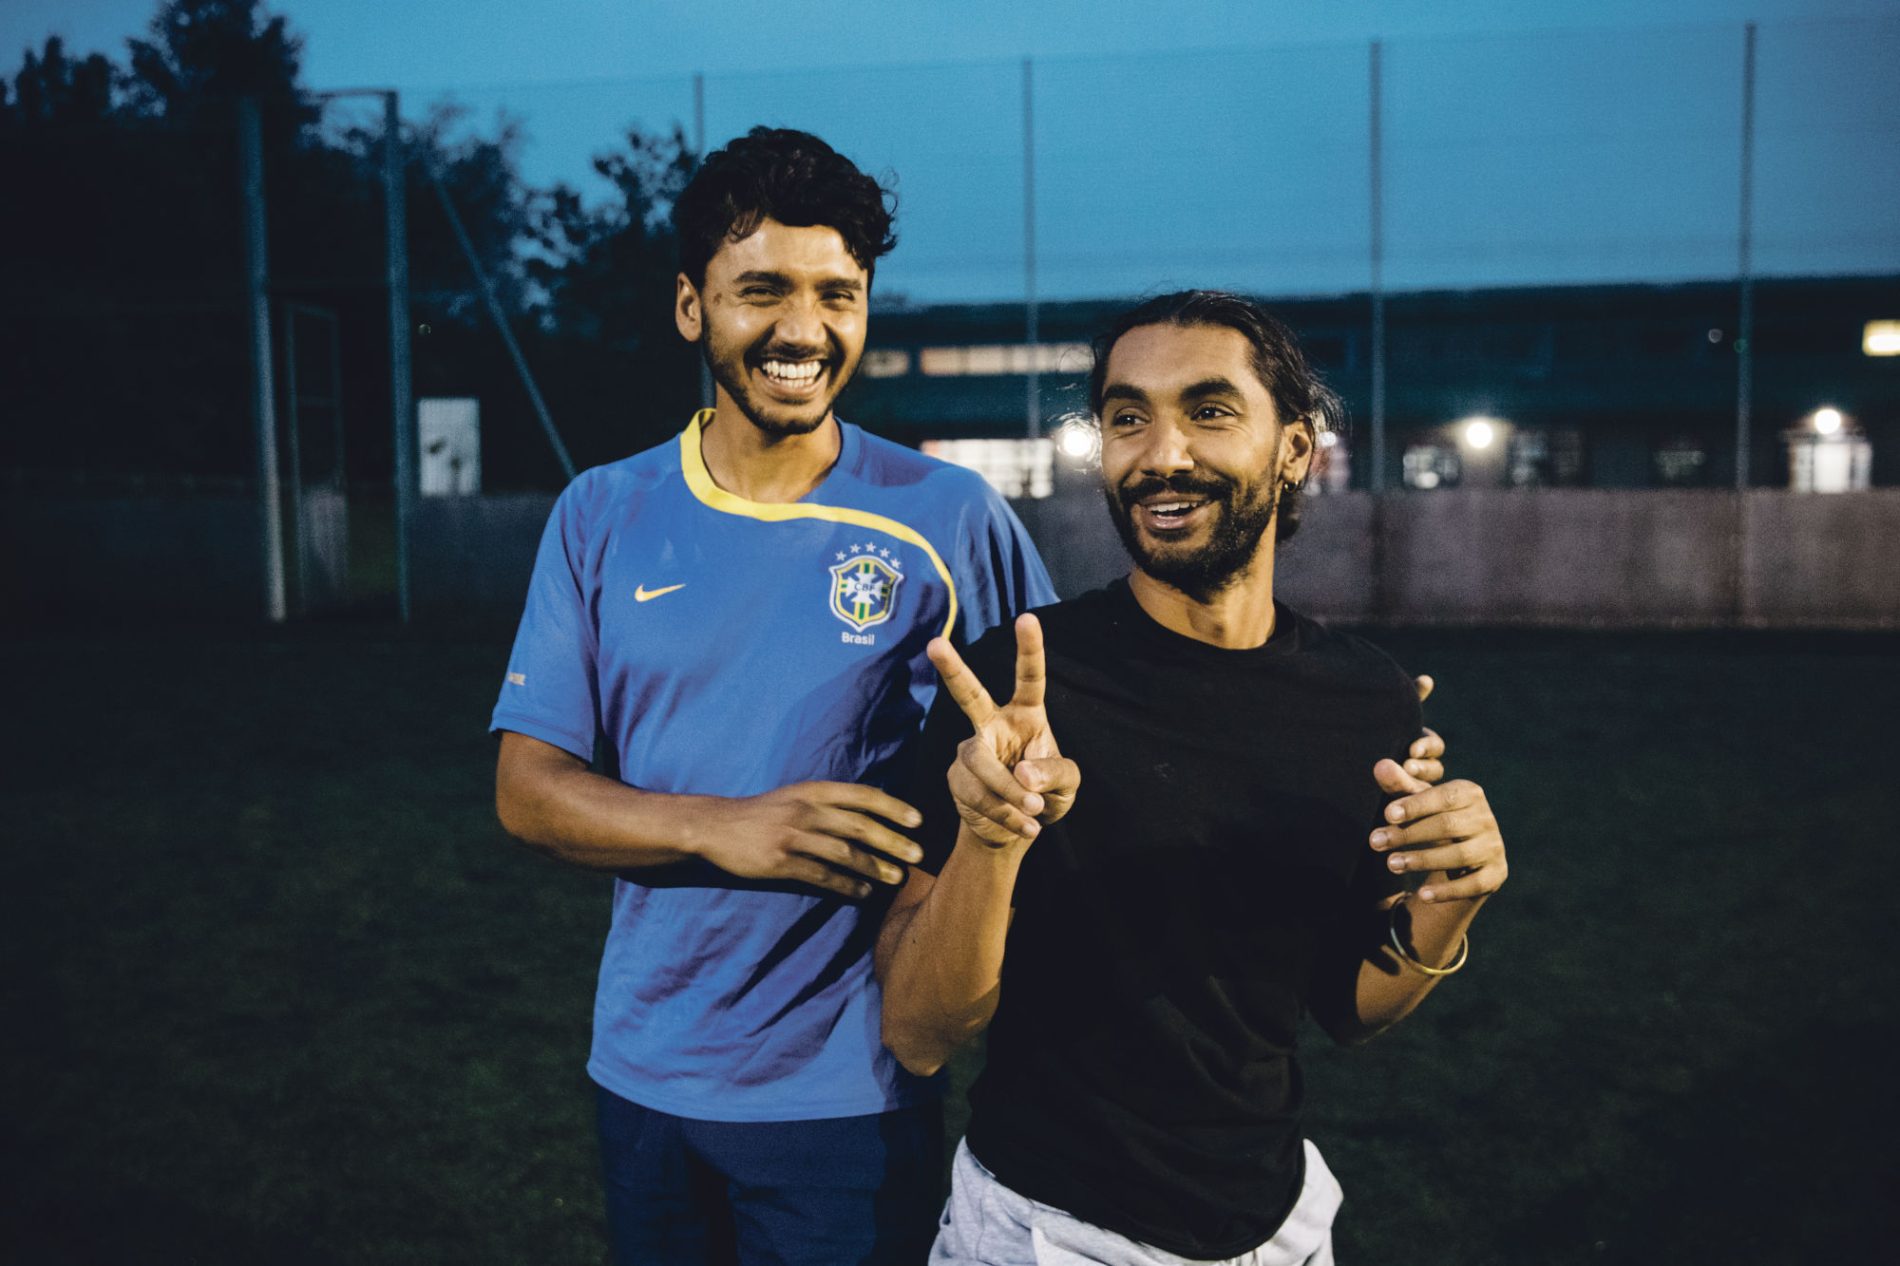 Two men joyfully celebrate together after playing a football match. One of them is making a peace sign. 